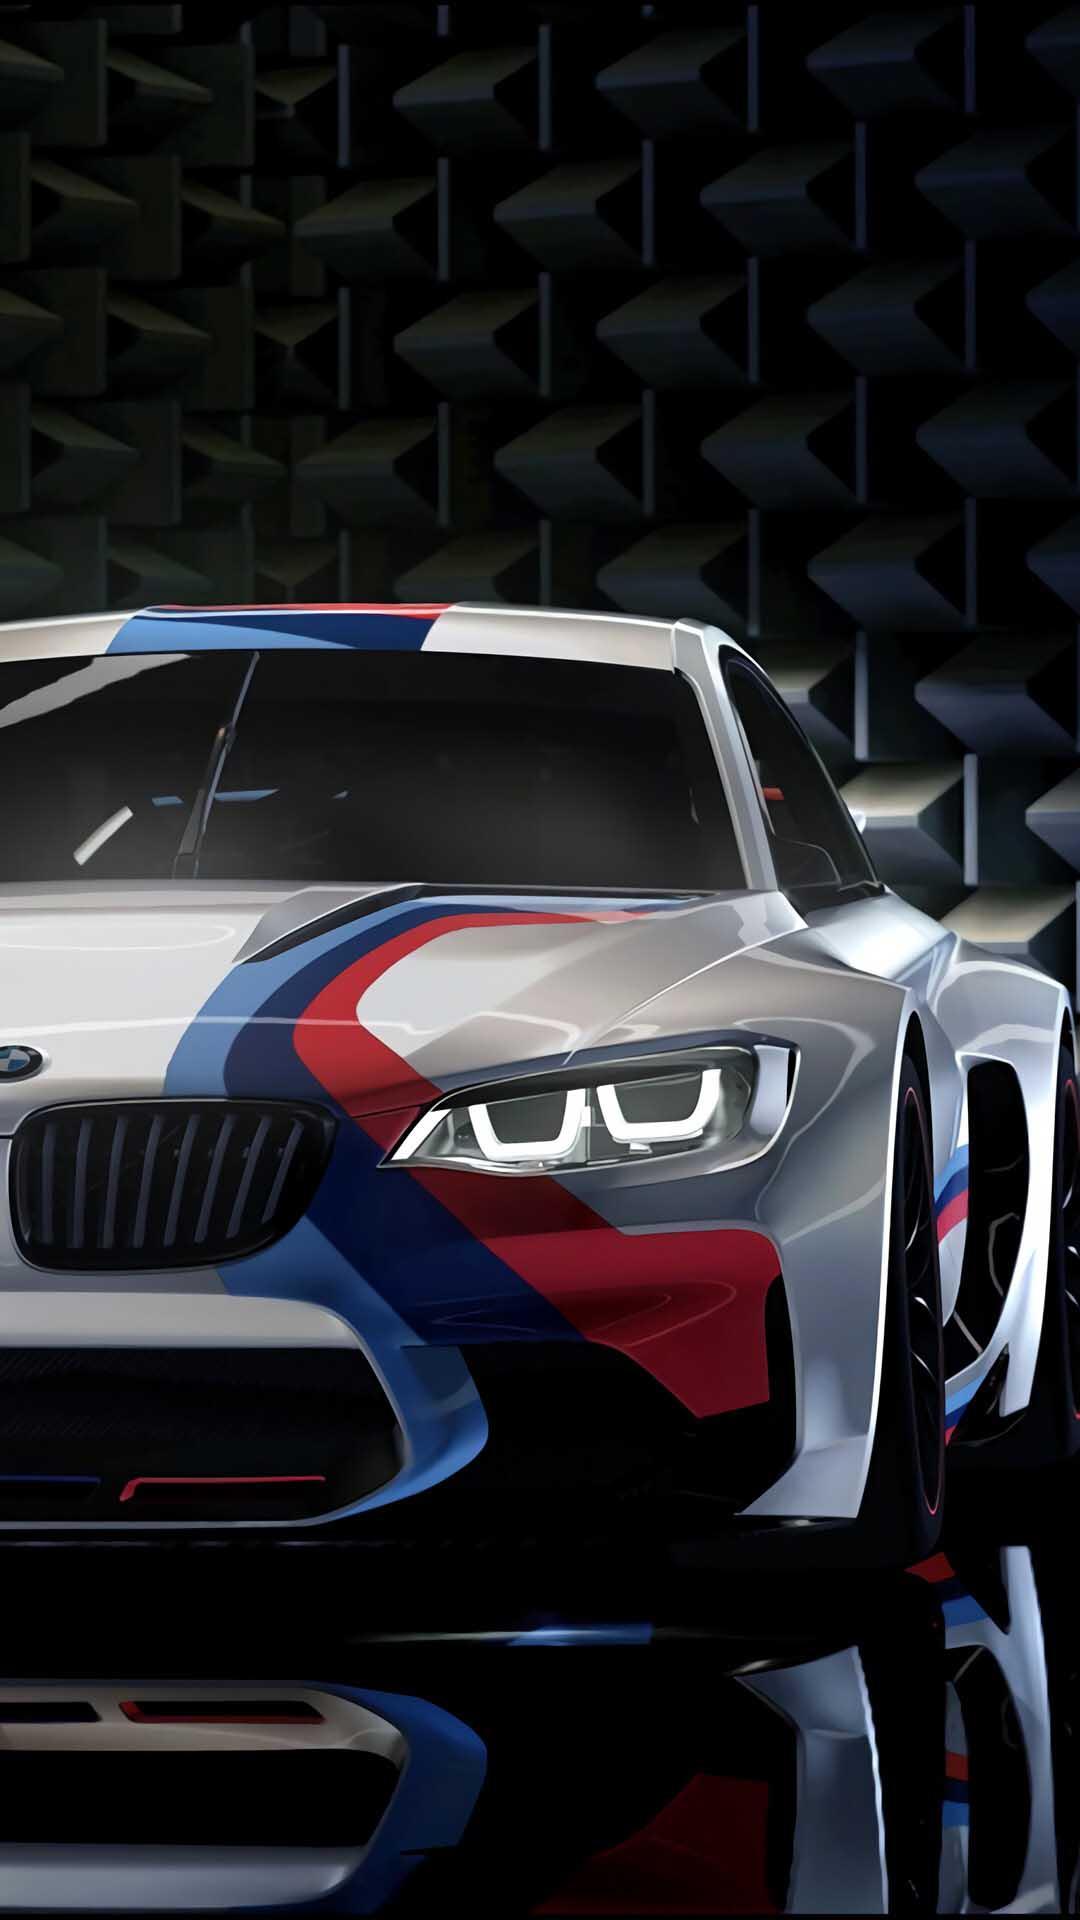 BMW Wallpapers for iPhone X, 8, 7, 6